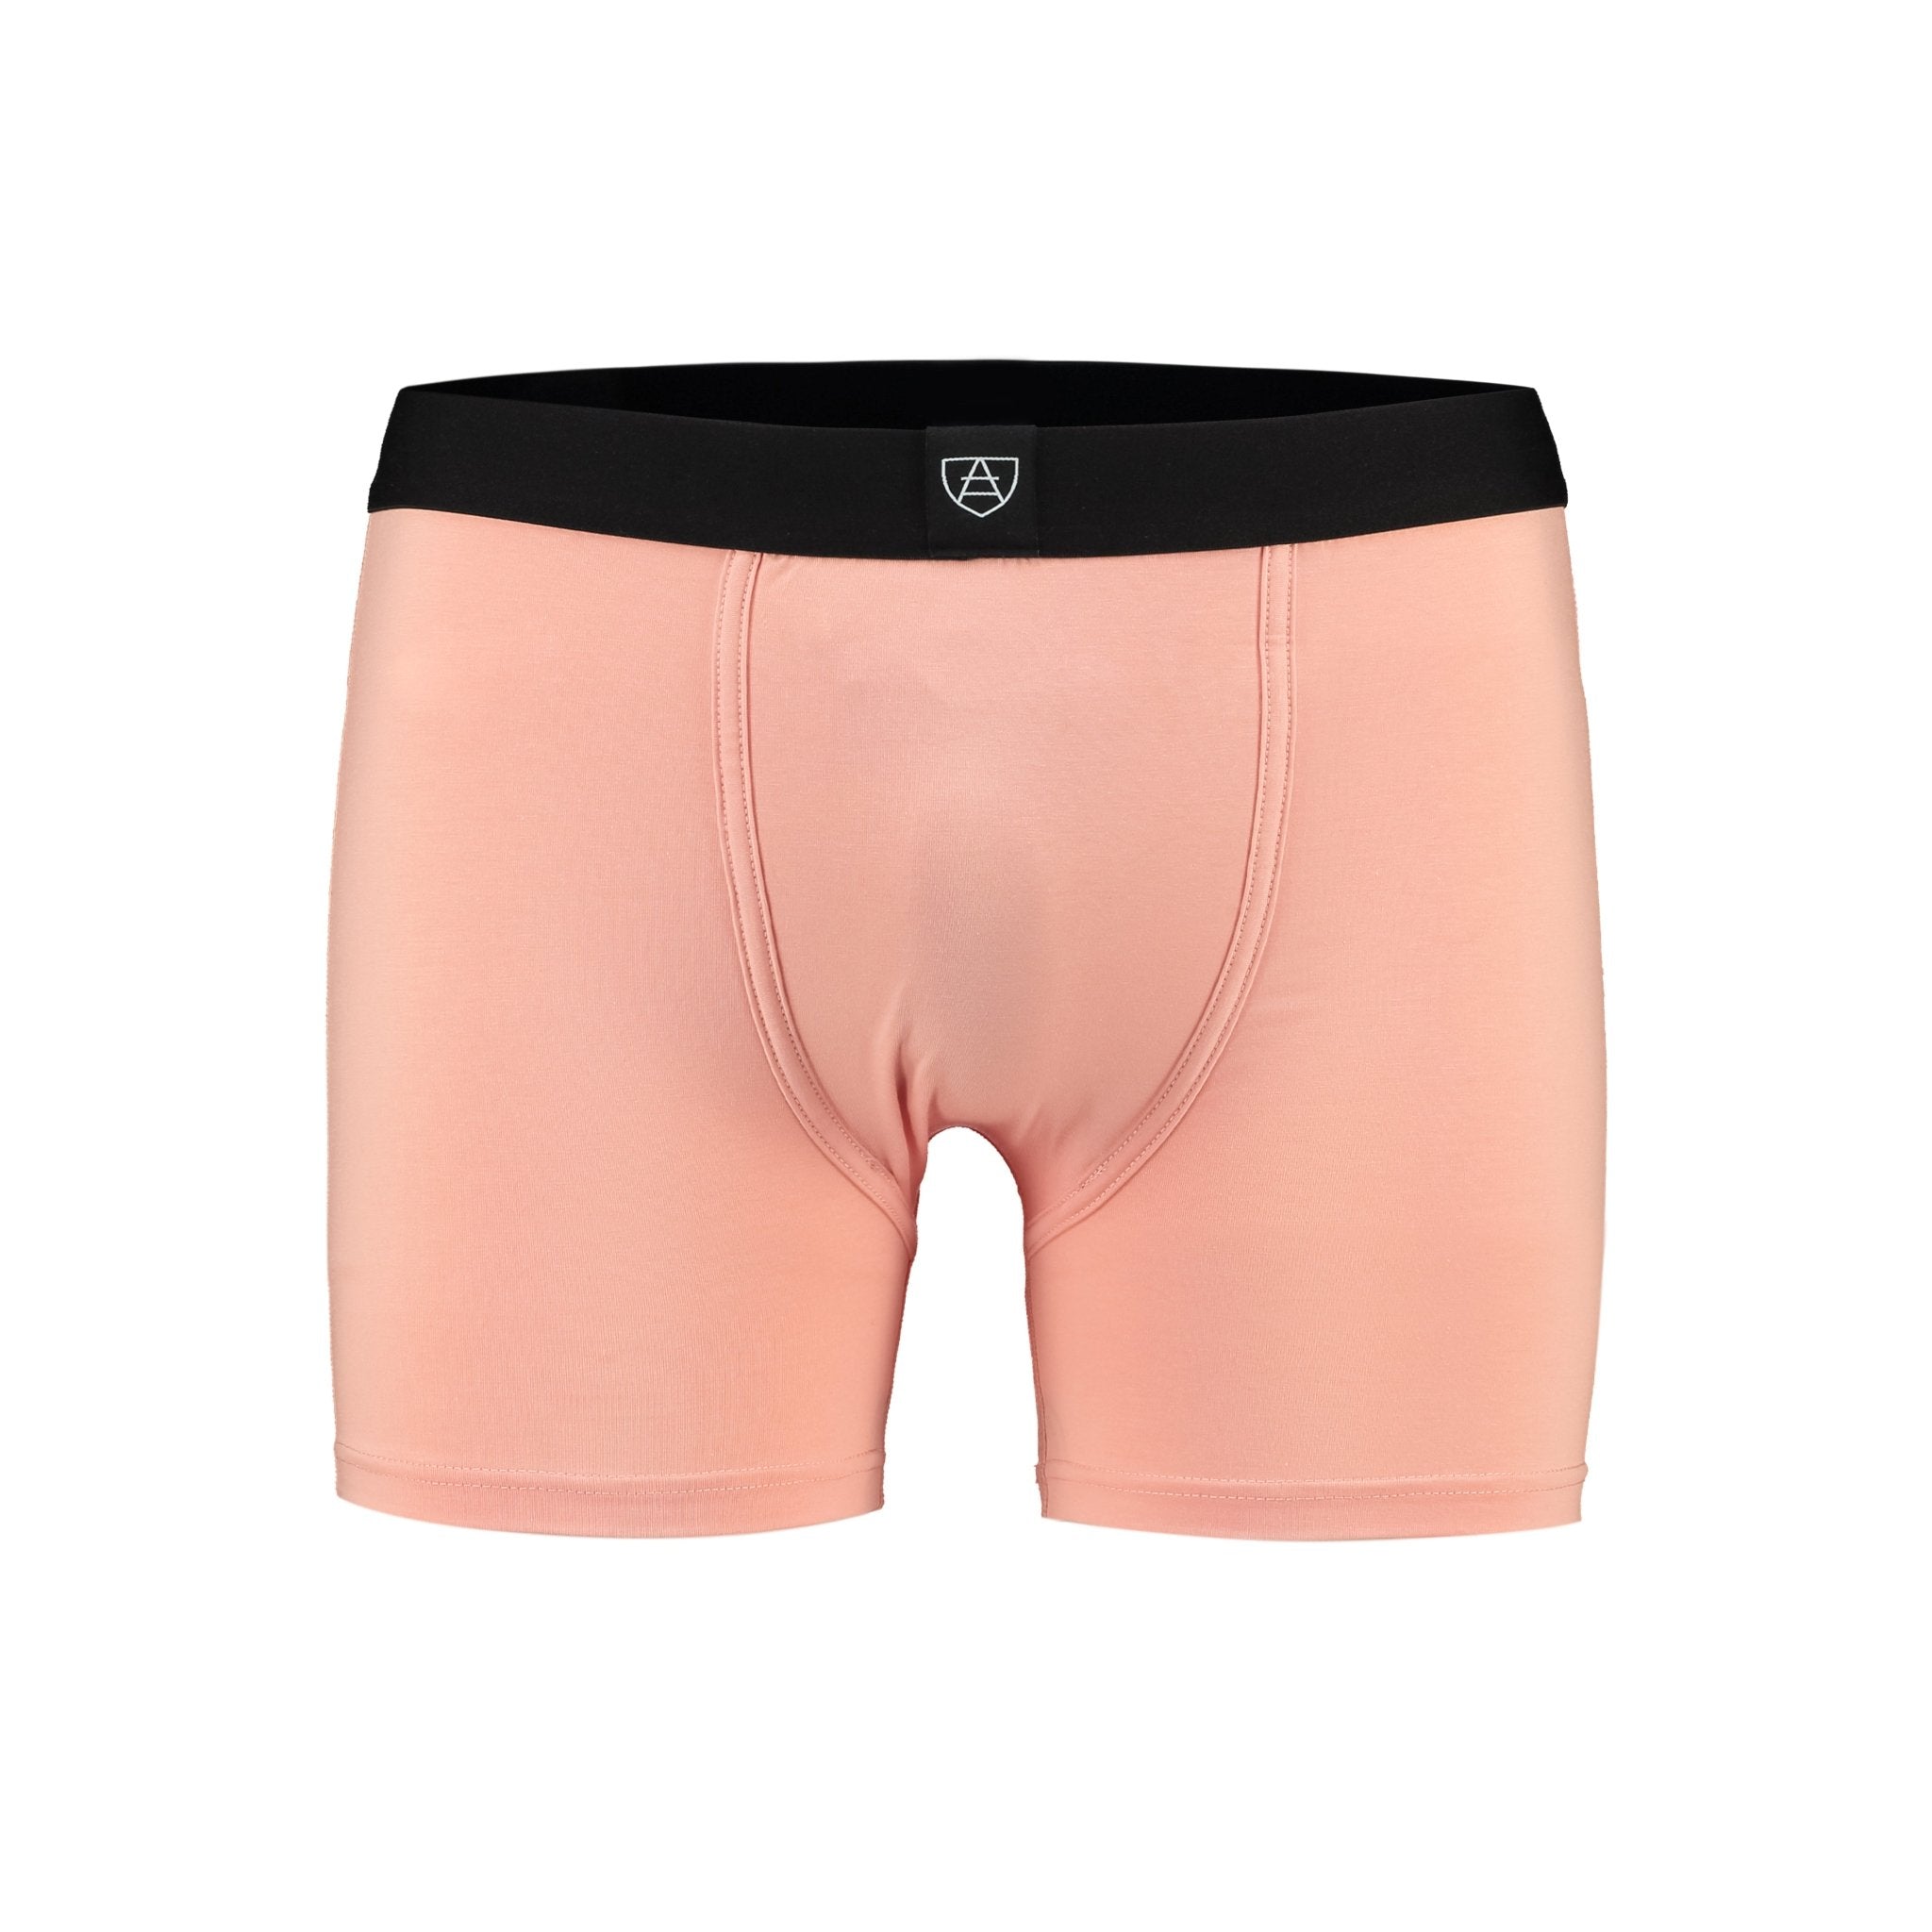 https://paxsies.com/cdn/shop/products/salmon-pink-all-in-one-packing-boxers-954838.jpg?v=1678122829